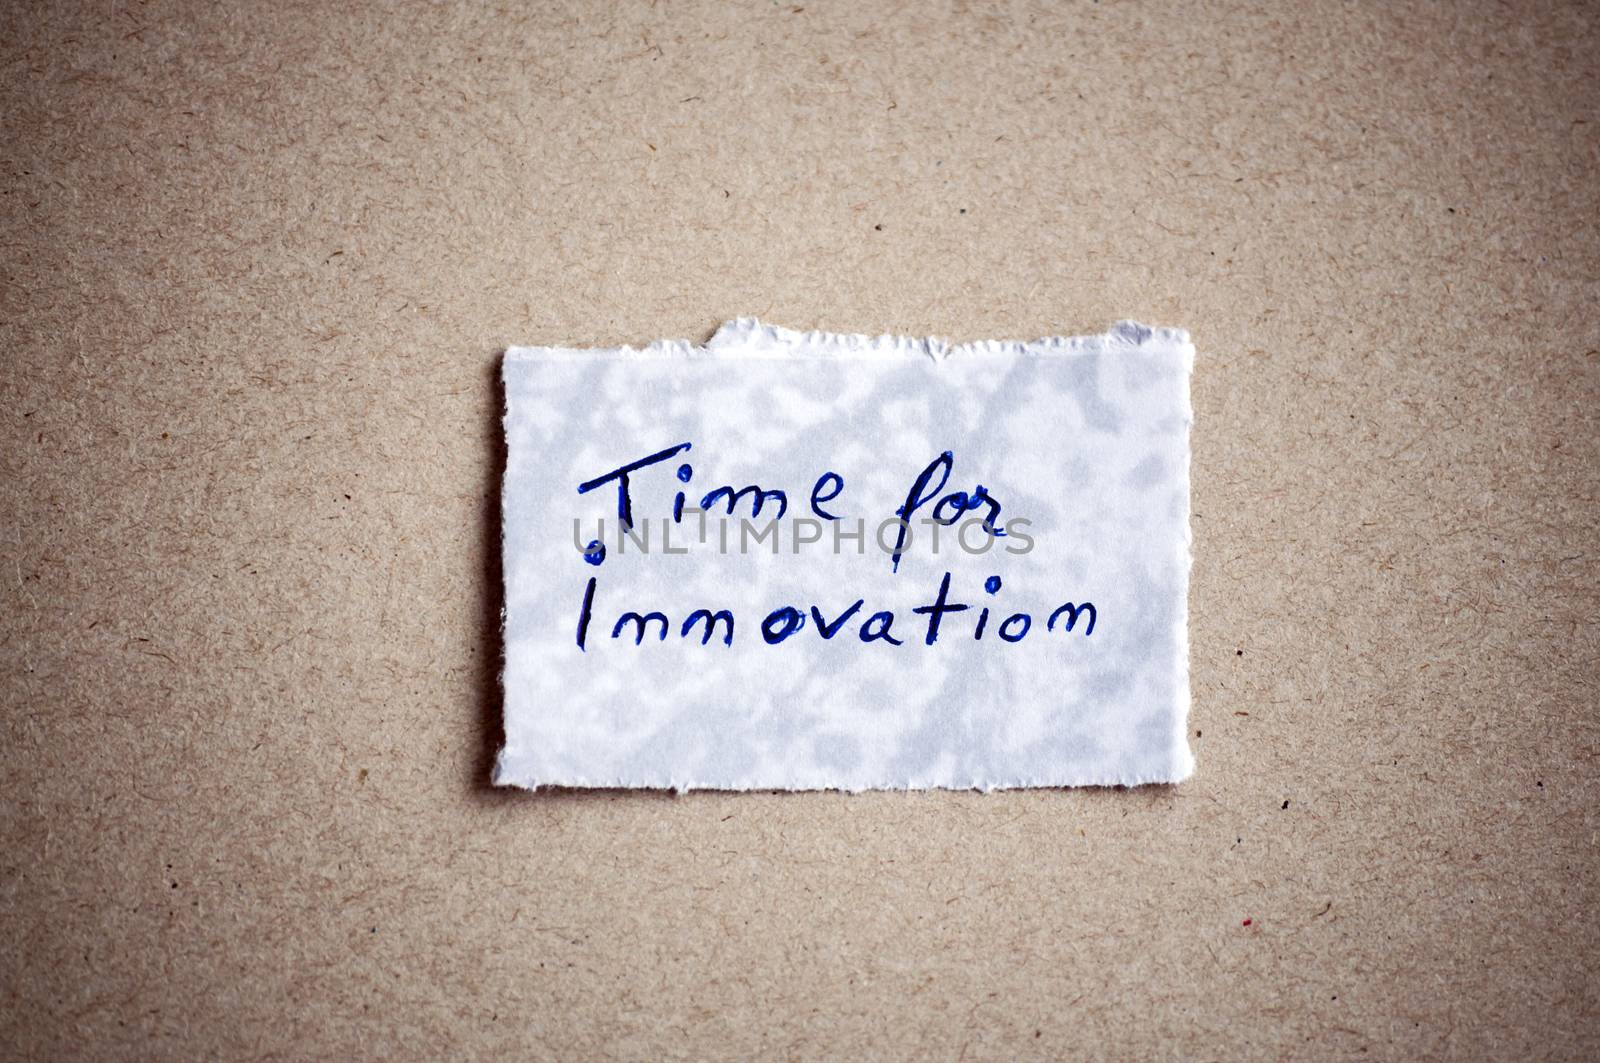 Time for innovation message,written on piece of paper, on cardboard background. Space for your text.